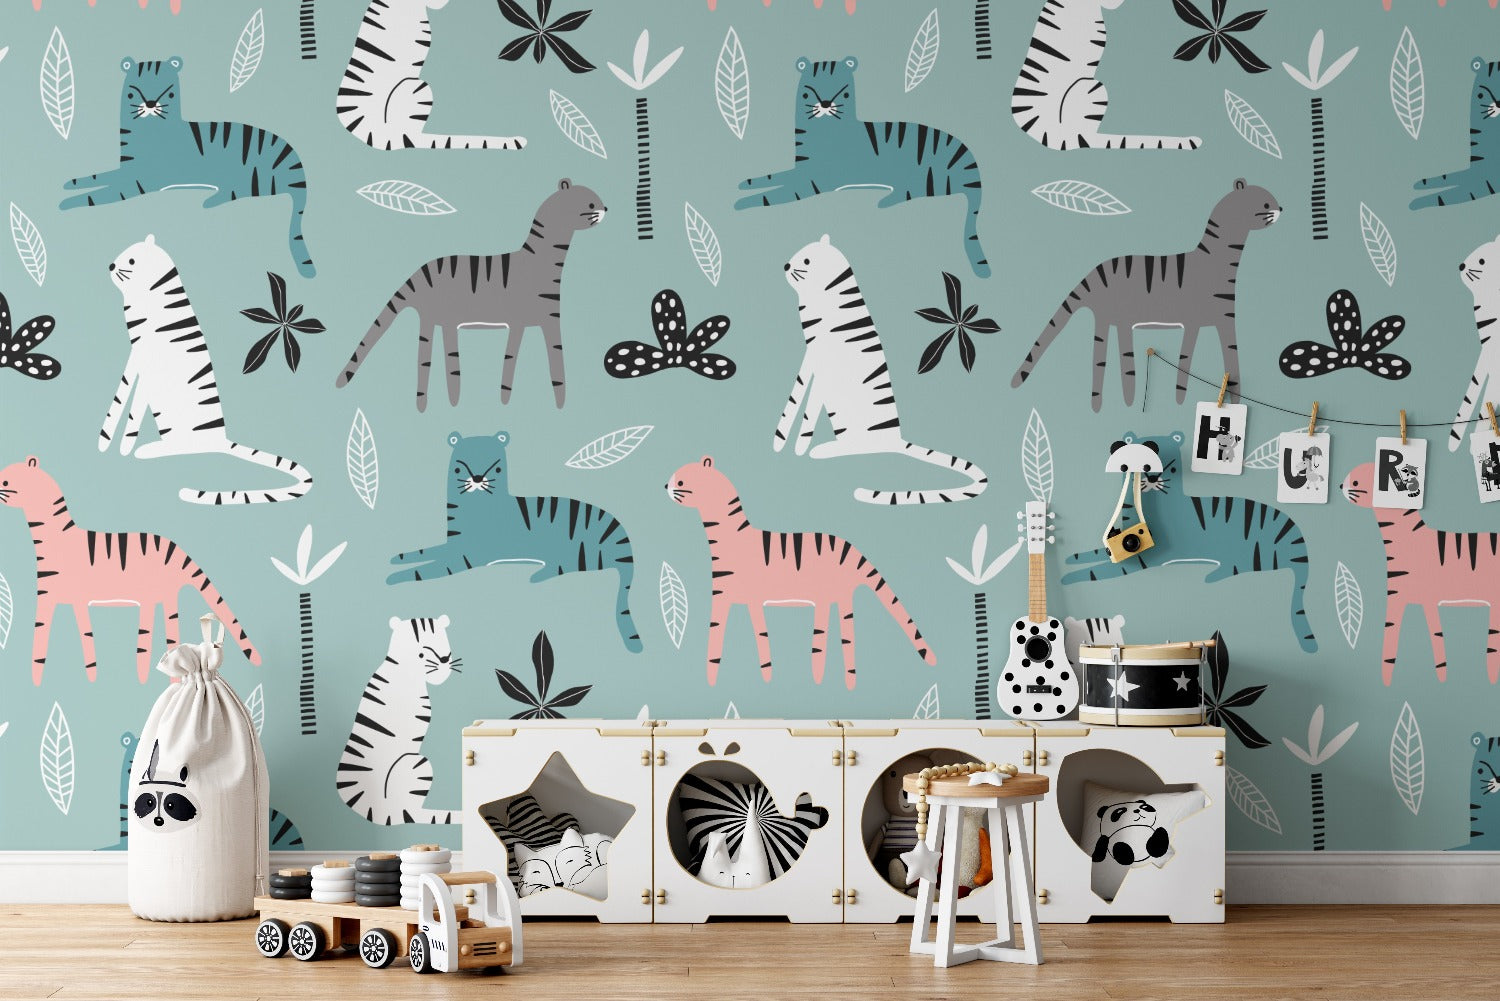 Children's playroom decorated with Kids Wallpaper - Tigers featuring assorted tigers and tropical plants on teal background